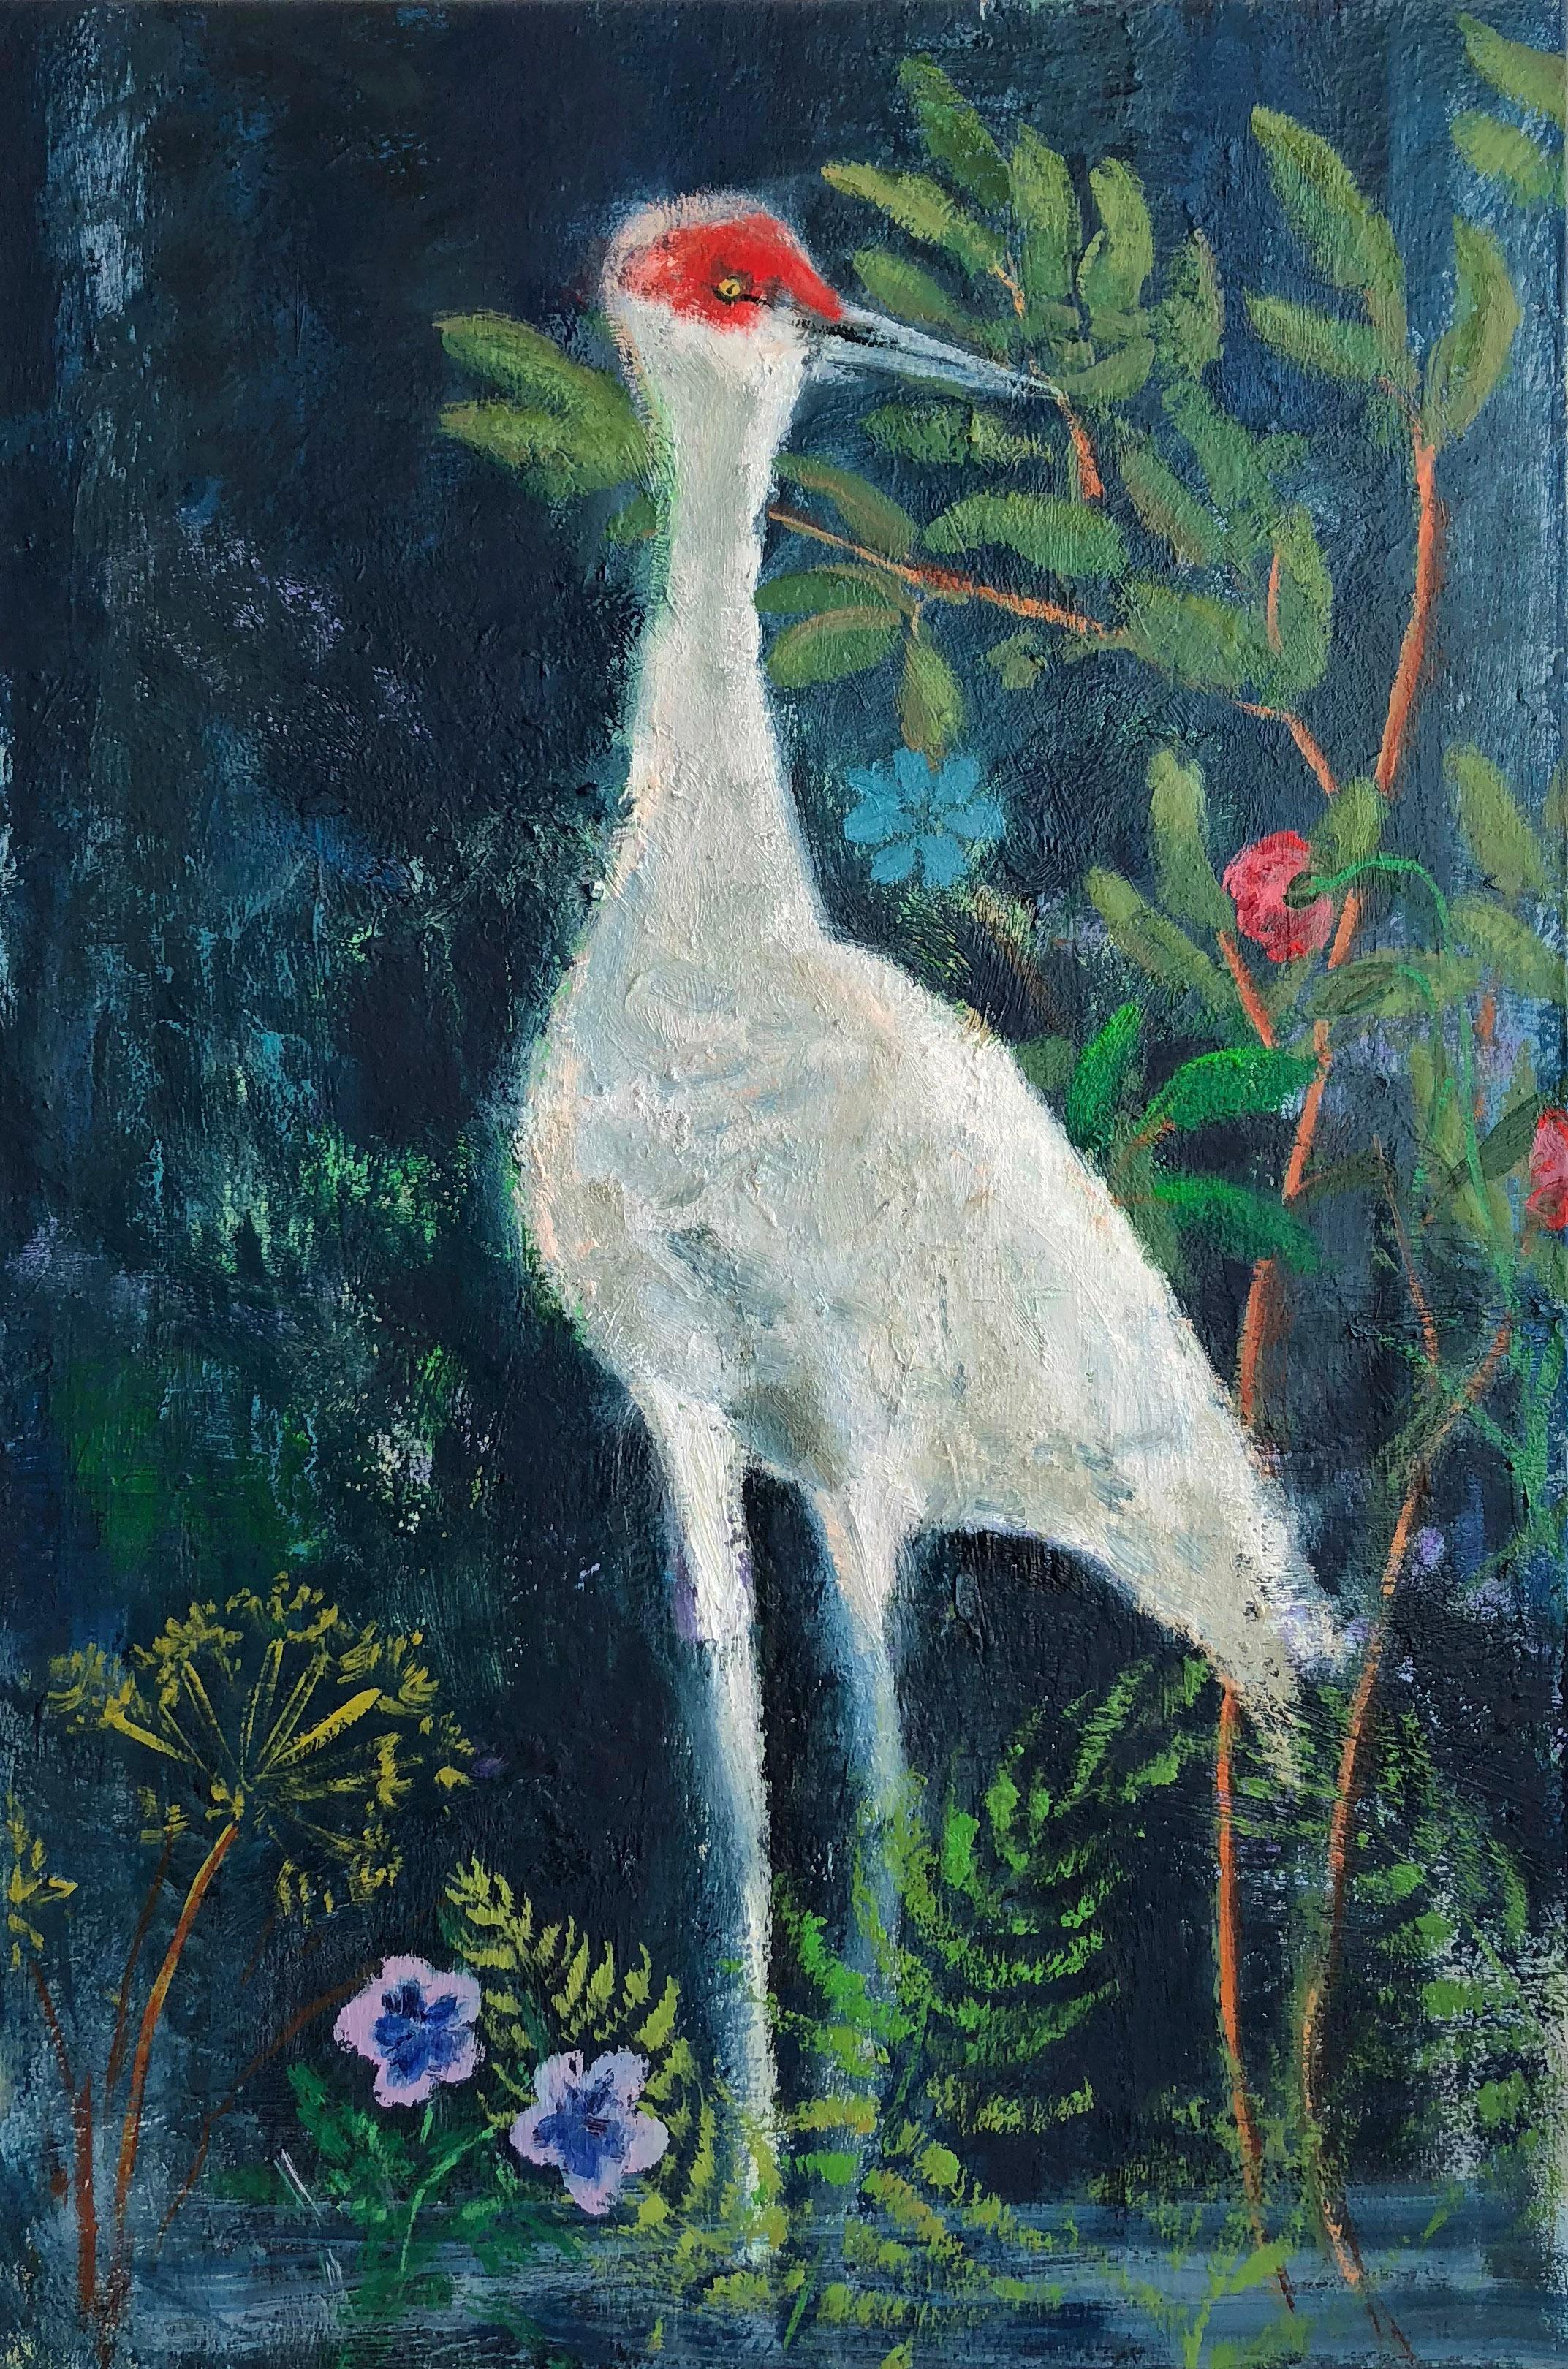 Melanie Parke Animal Painting - Night Ferns, Vertical Painting, White and Red Bird with Flowers on Navy Blue